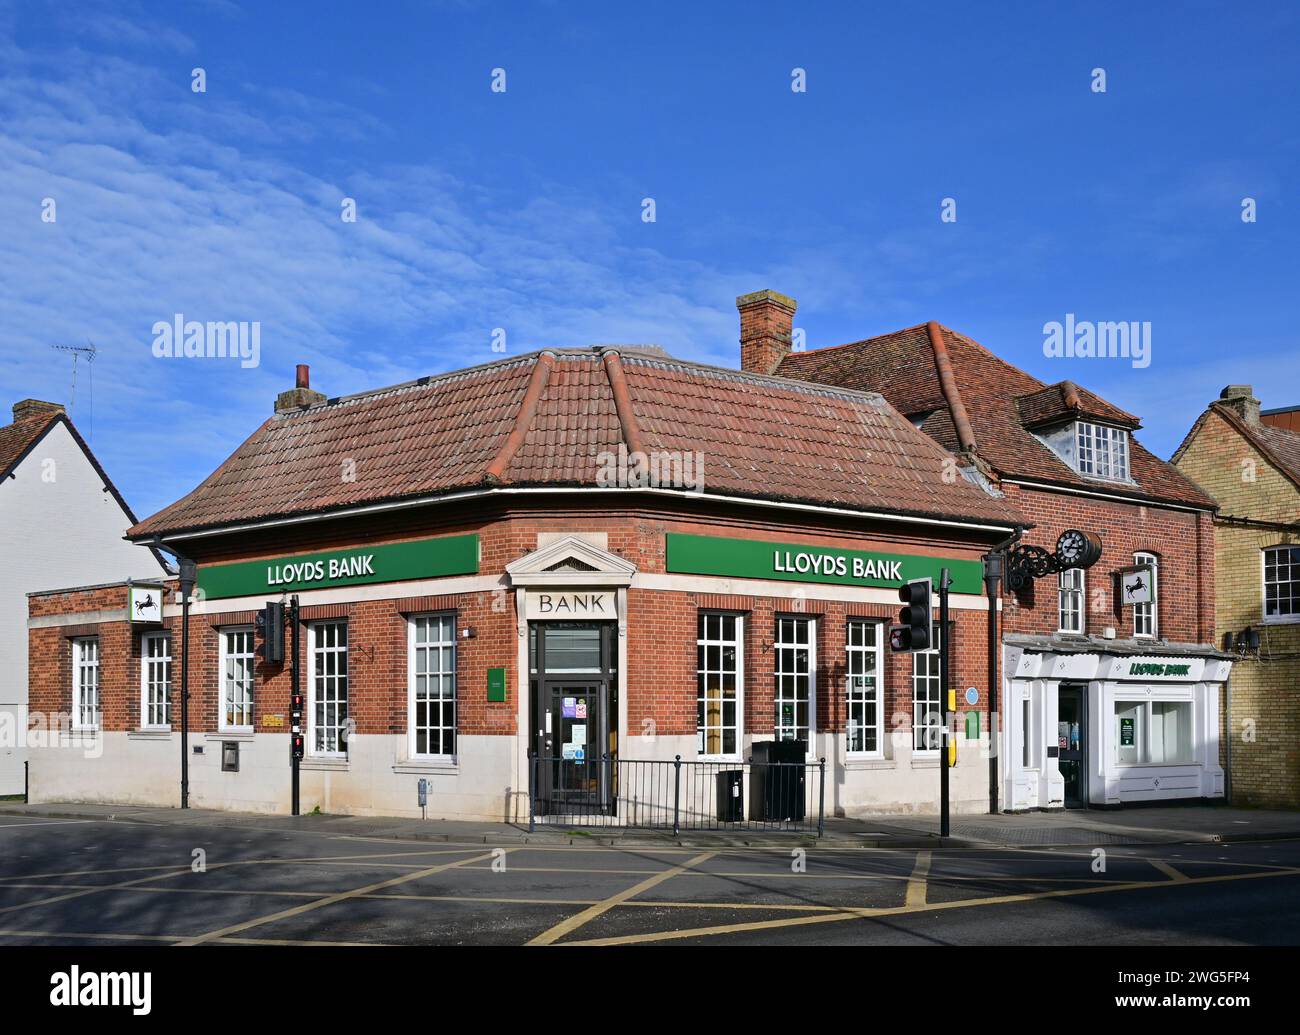 The road junction of Melbourn Street and Kneesworth Street with Lloyds Bank on the corner, Royston, Hertfordshire, England, UK . Stock Photo